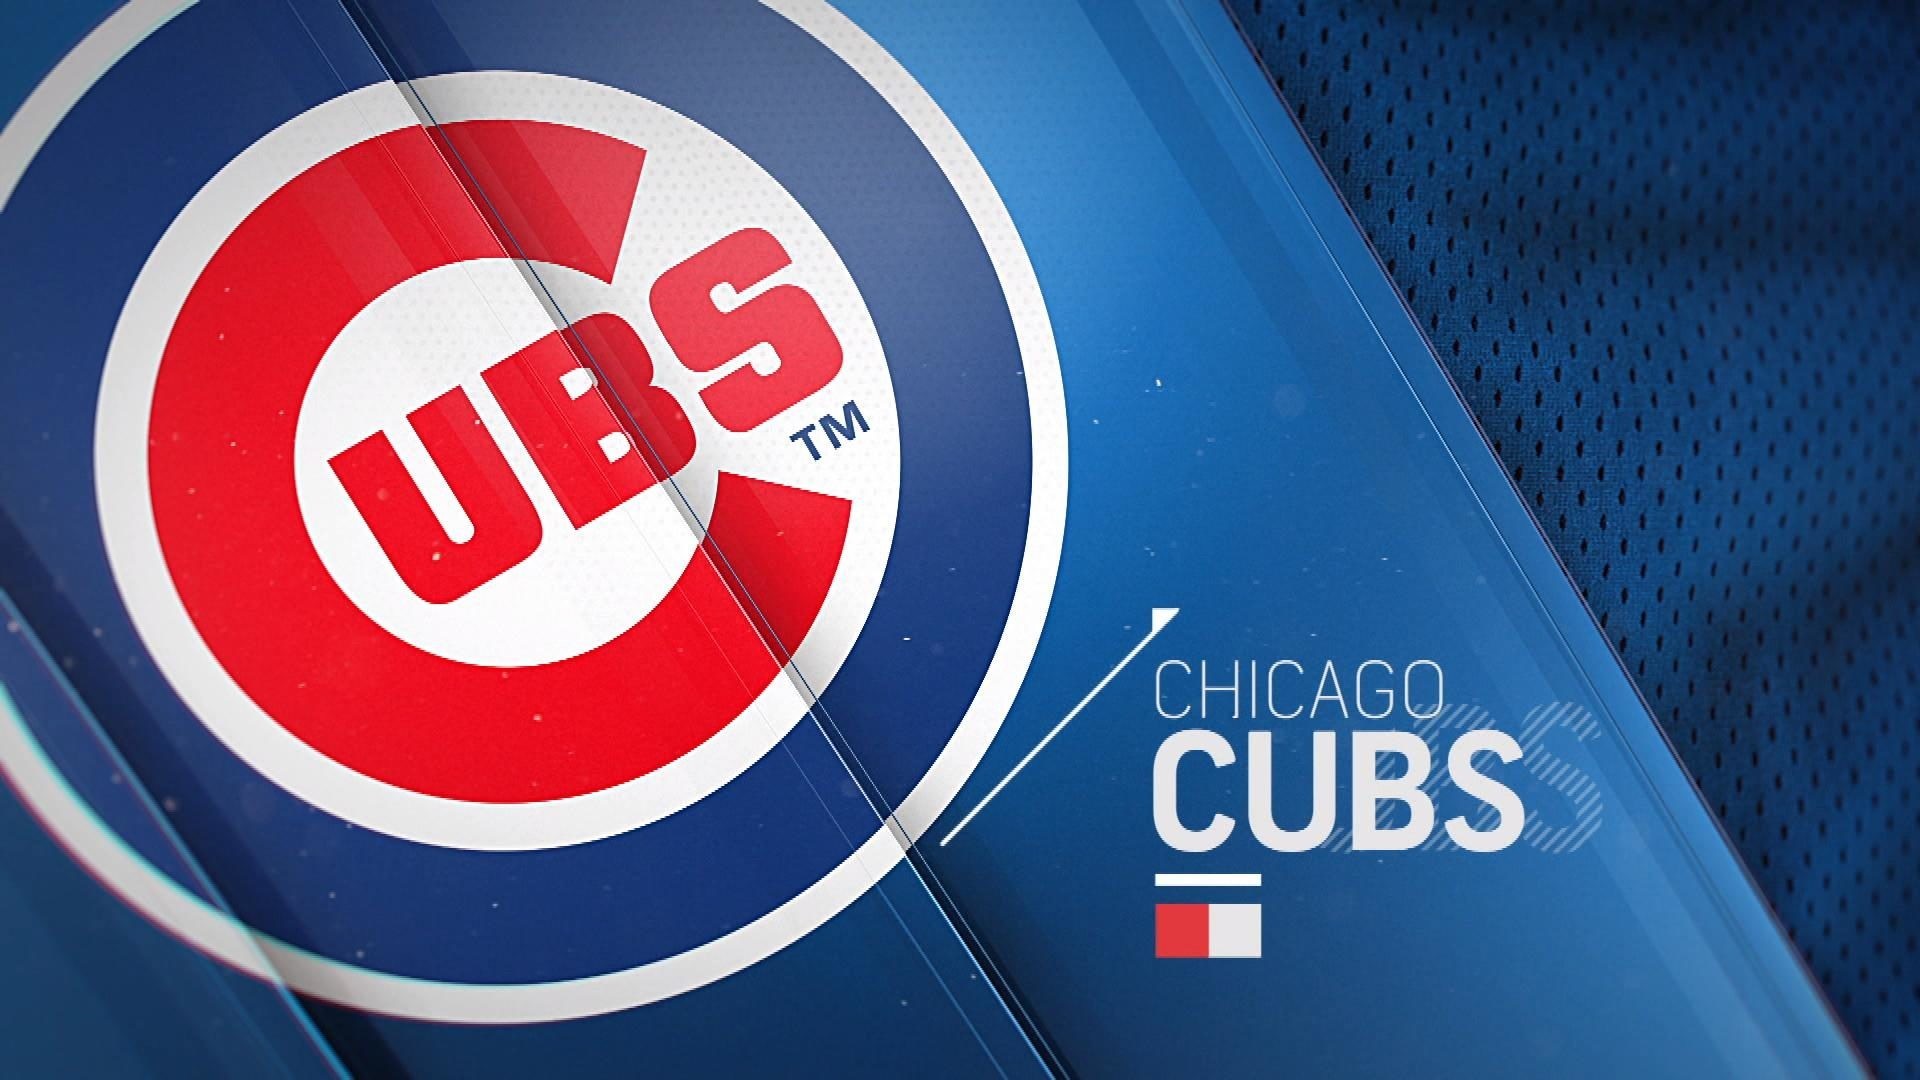 1920x1080  Cubs Wallpaper for your Desktop Chicago Cubs - HD Wallpapers